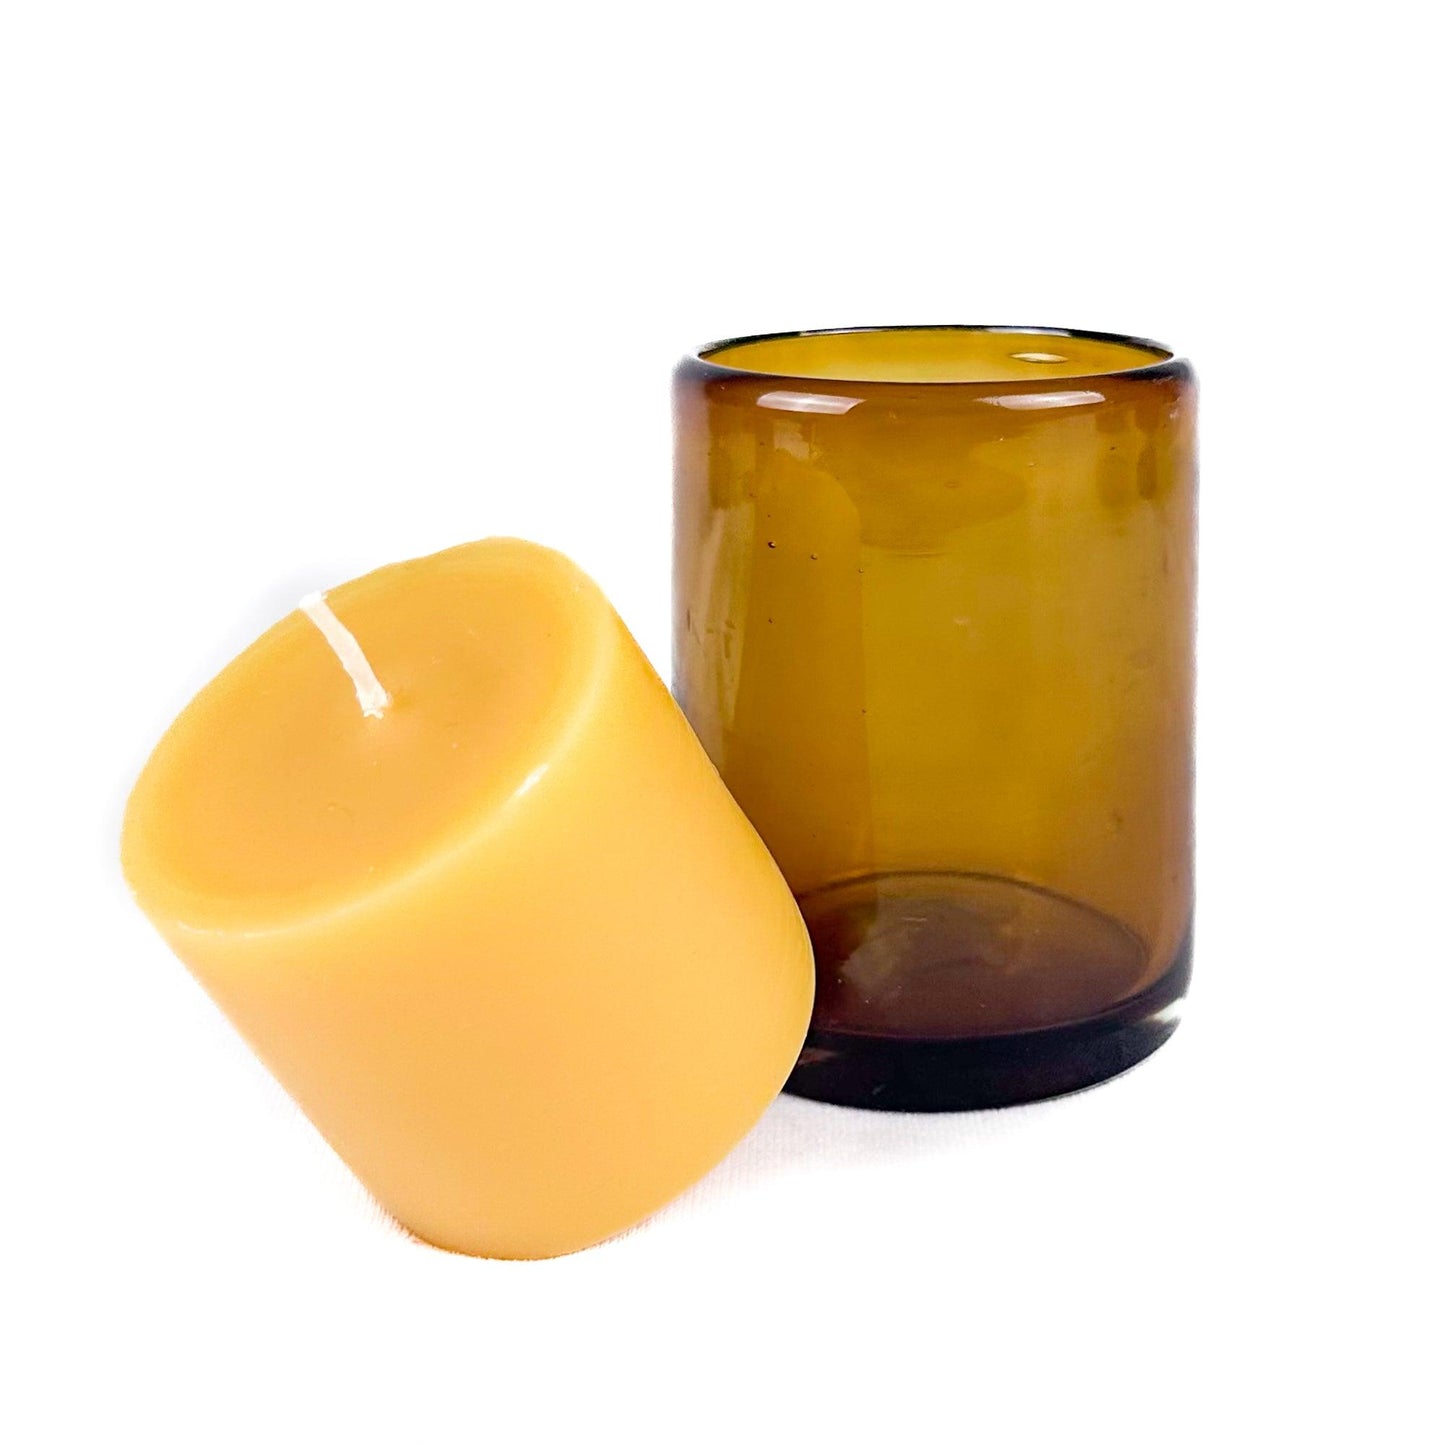 NEW Refill - Beeswax Botanica Candle for Blown Glass - Bluecorn Candles